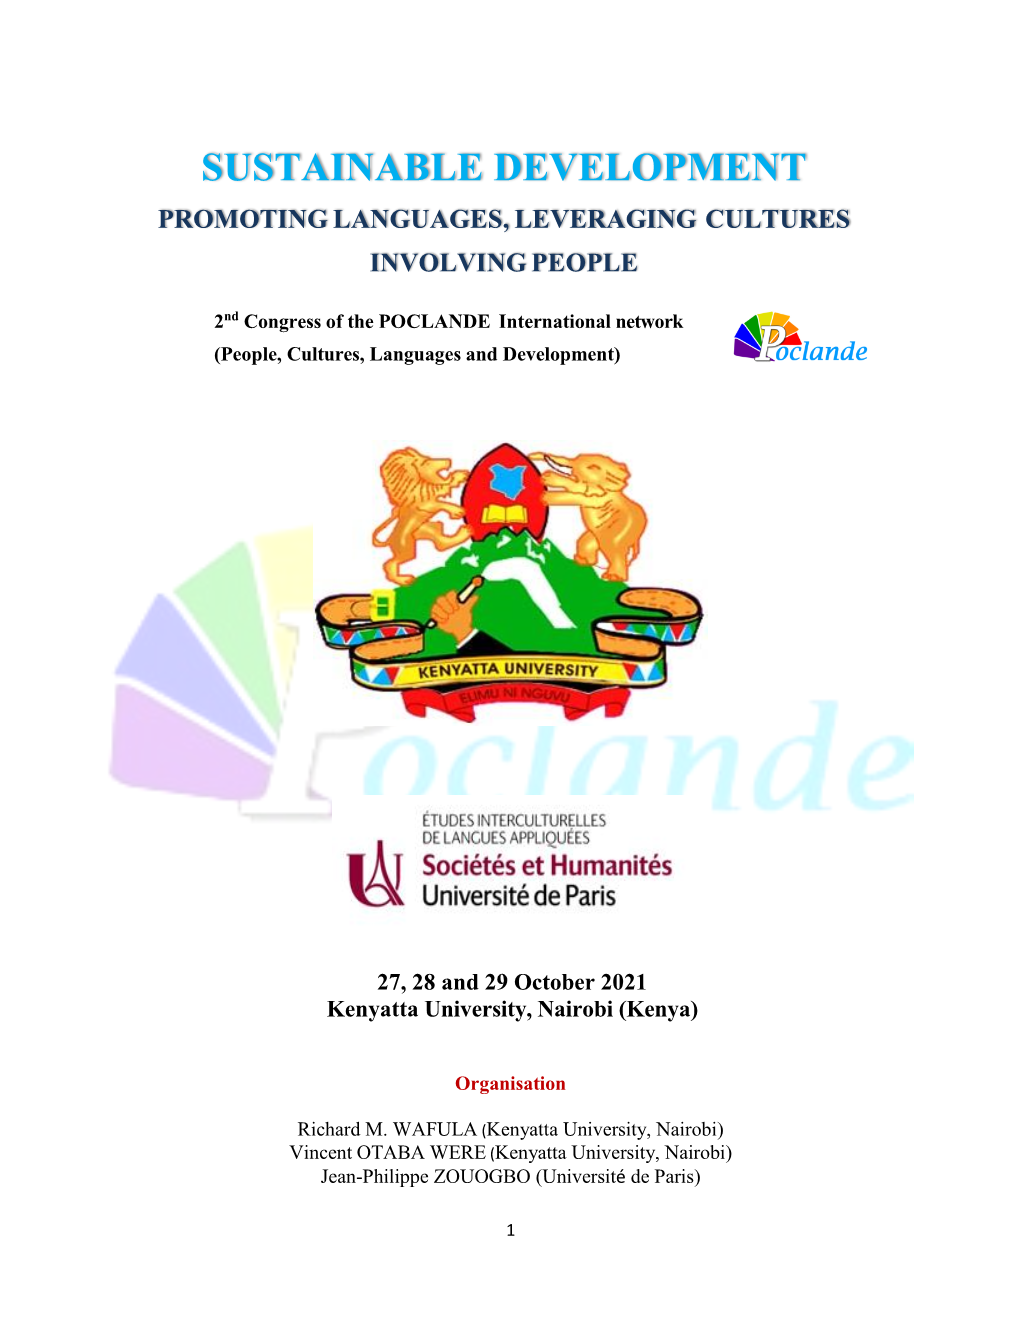 Sustainable Development Promoting Languages, Leveraging Cultures Involving People